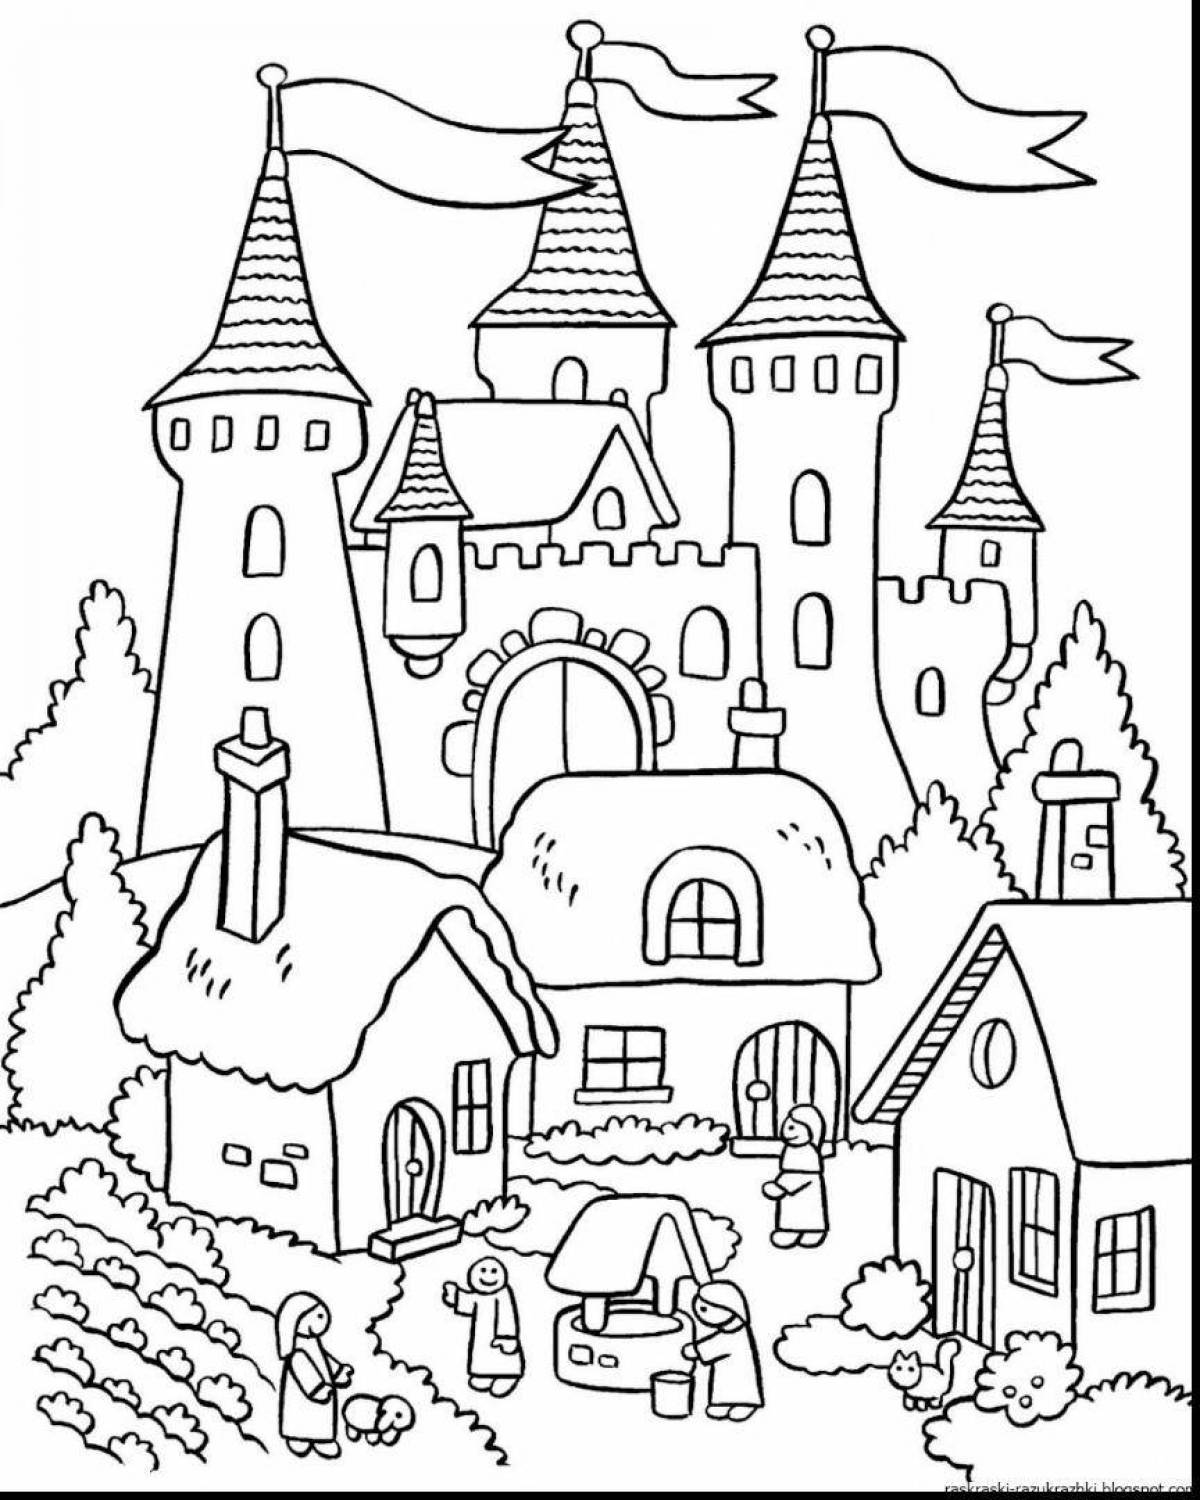 Coloring book shining castle for girls